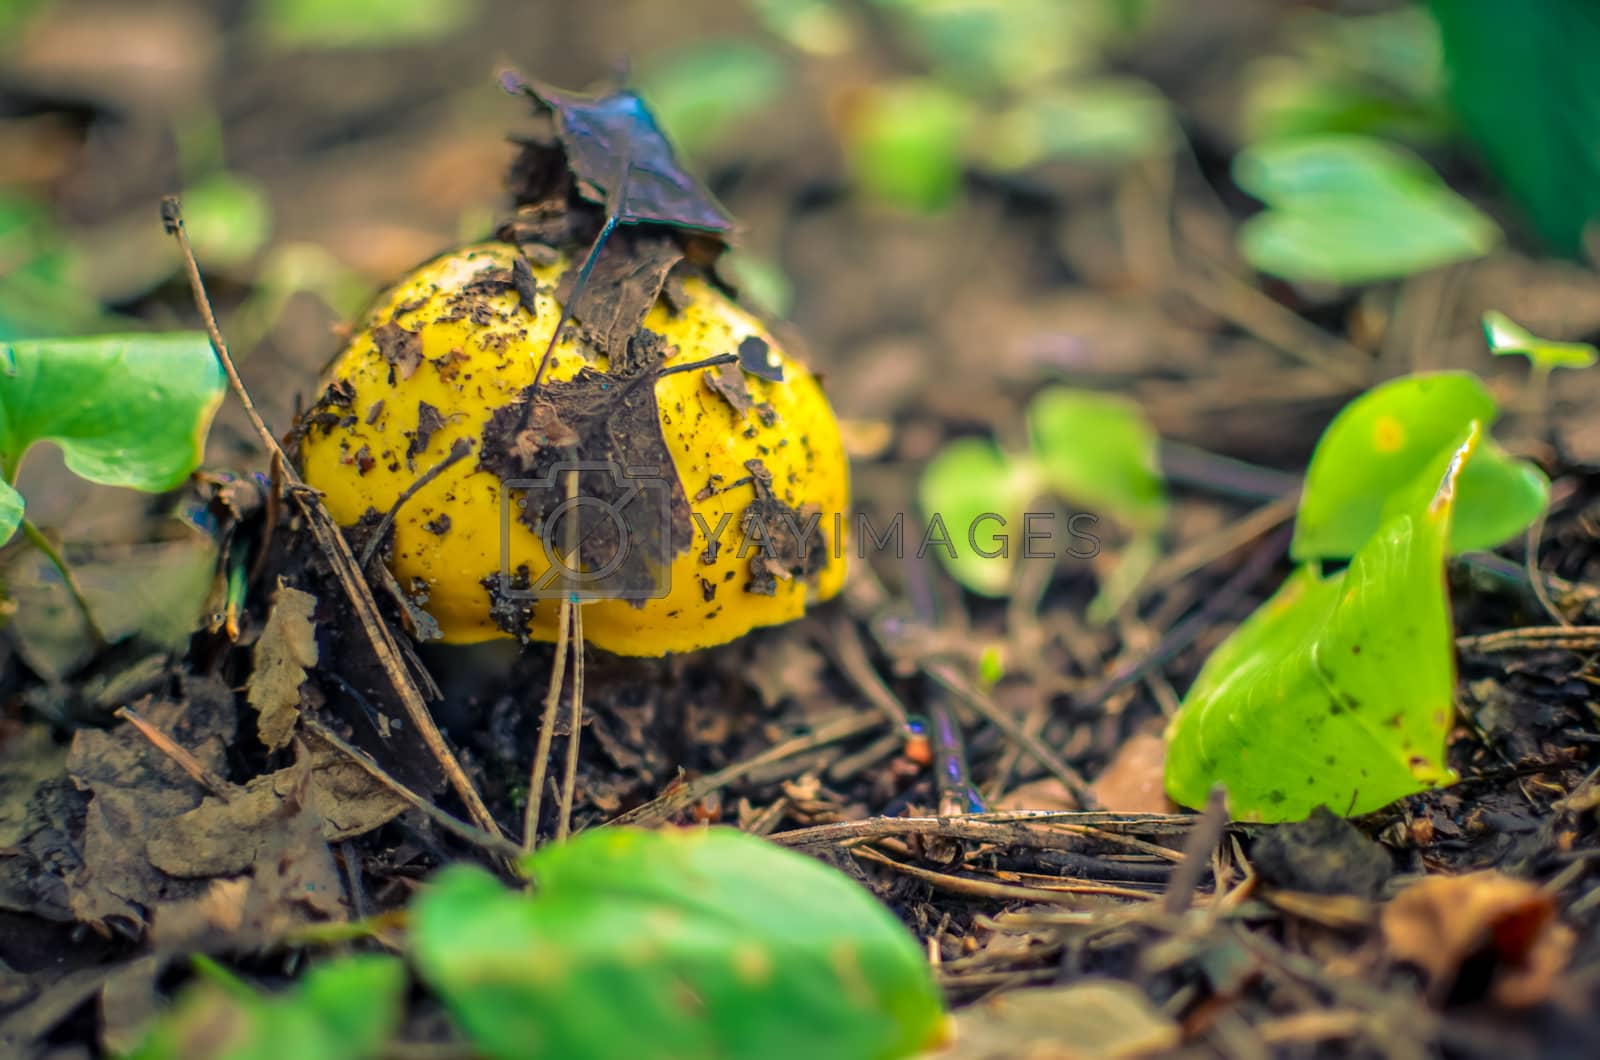 Royalty free image of One wild edible yellow mushroom in the forest closeup by kimbo-bo